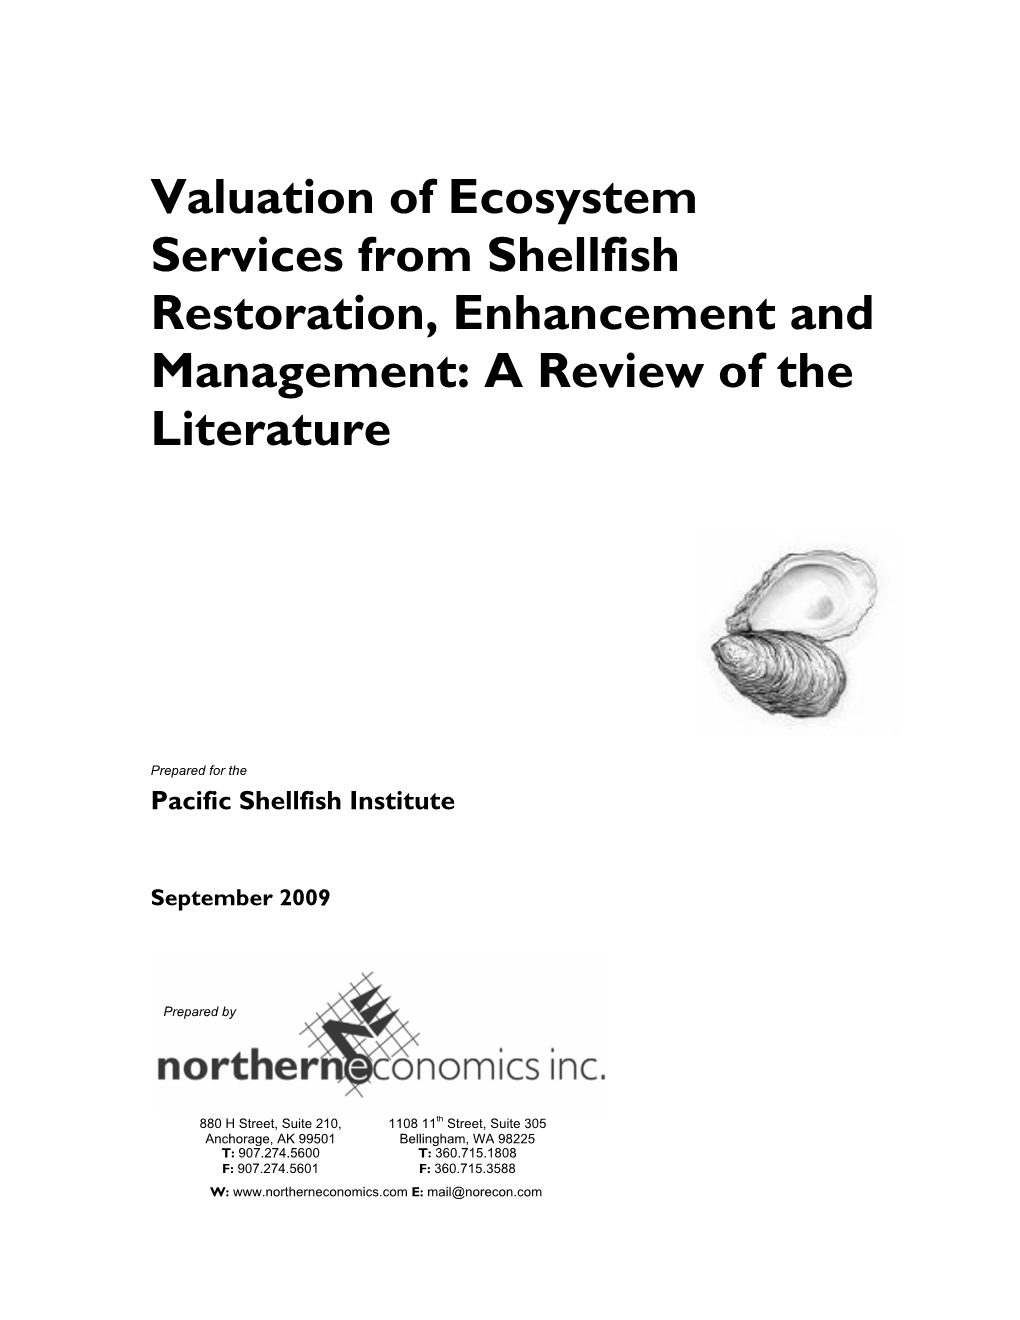 Valuation of Ecosystem Services from Shellfish Restoration, Enhancement and Management: a Review of the Literature